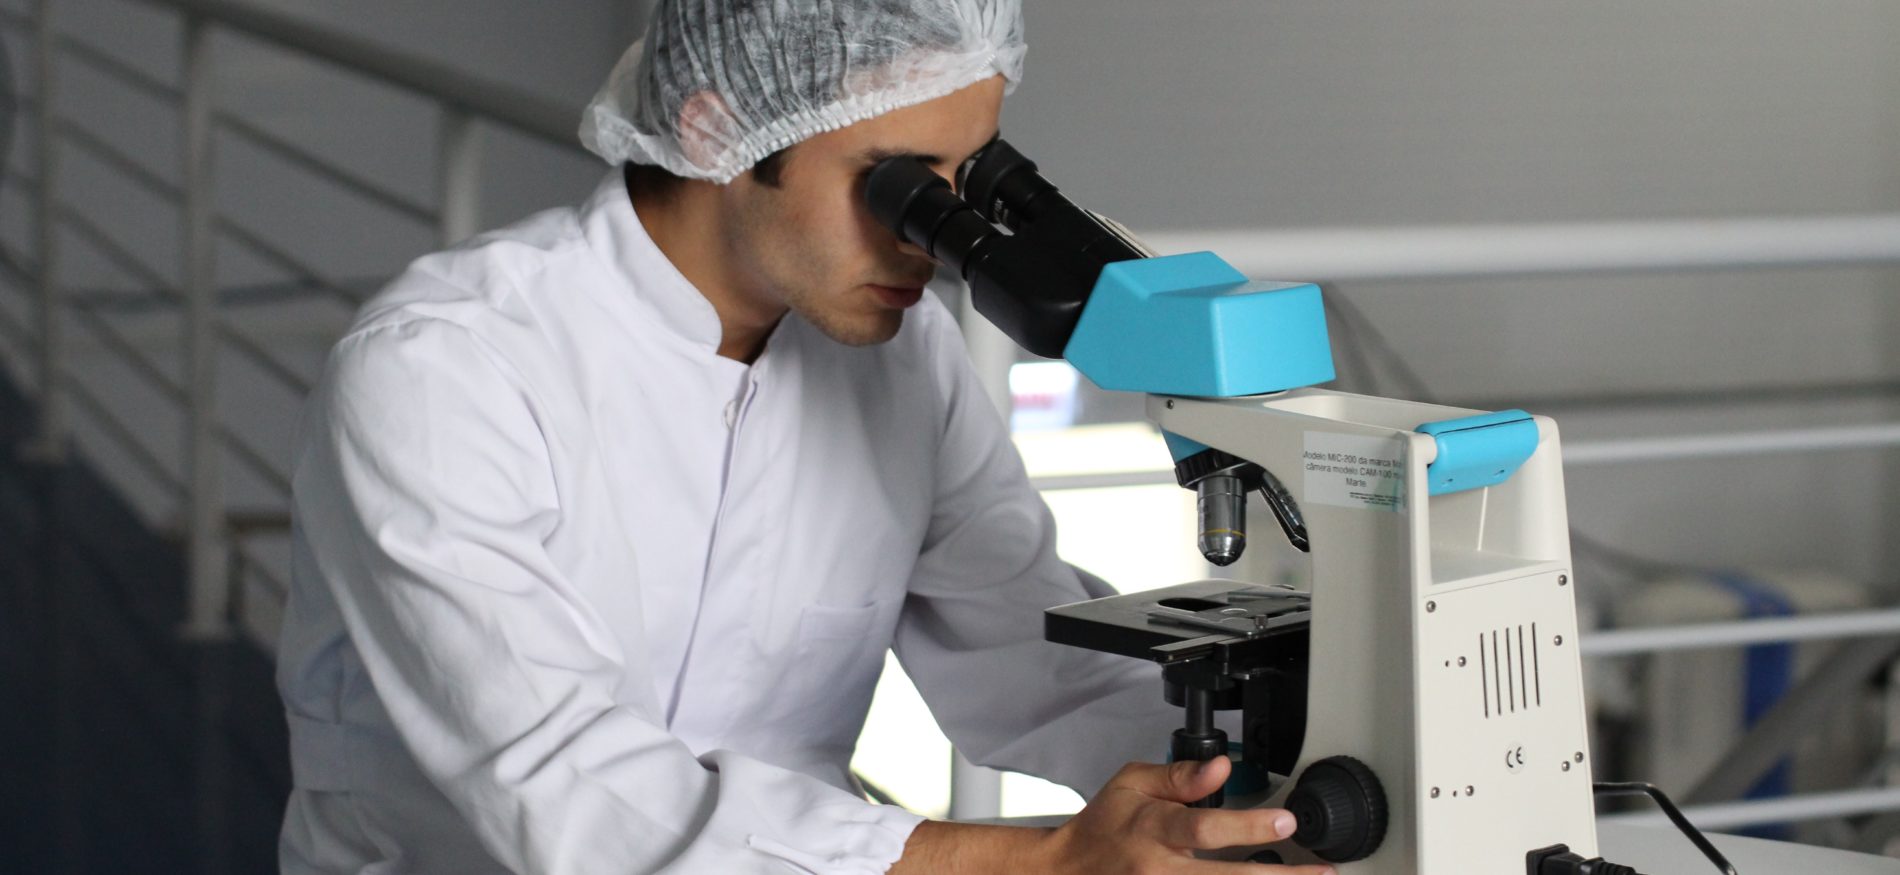 Scientist looking into microscope